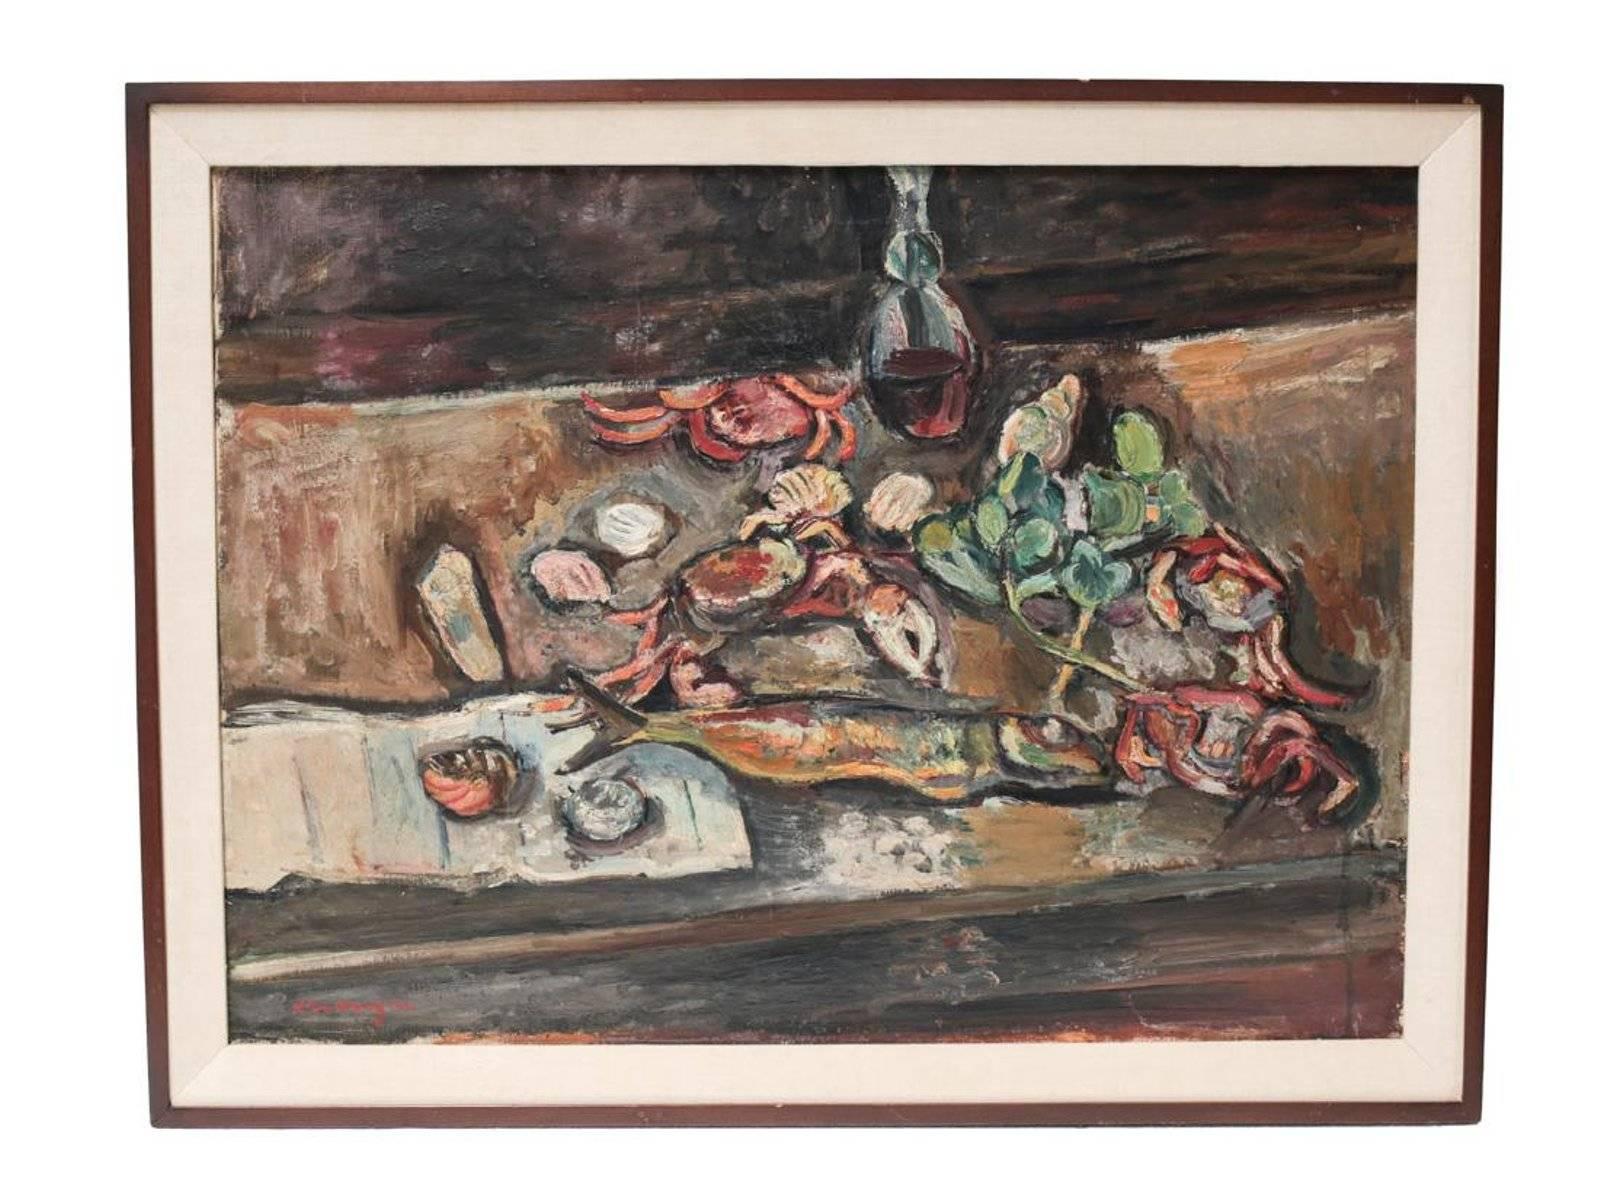 An oil on canvas still life painting of still life of crabs at the dinner table by French artist, Kremegne Signed Kremegne (lower left).

Please note this painting is accompanied with the original receipt of purchase from The Modern Art Gallery in